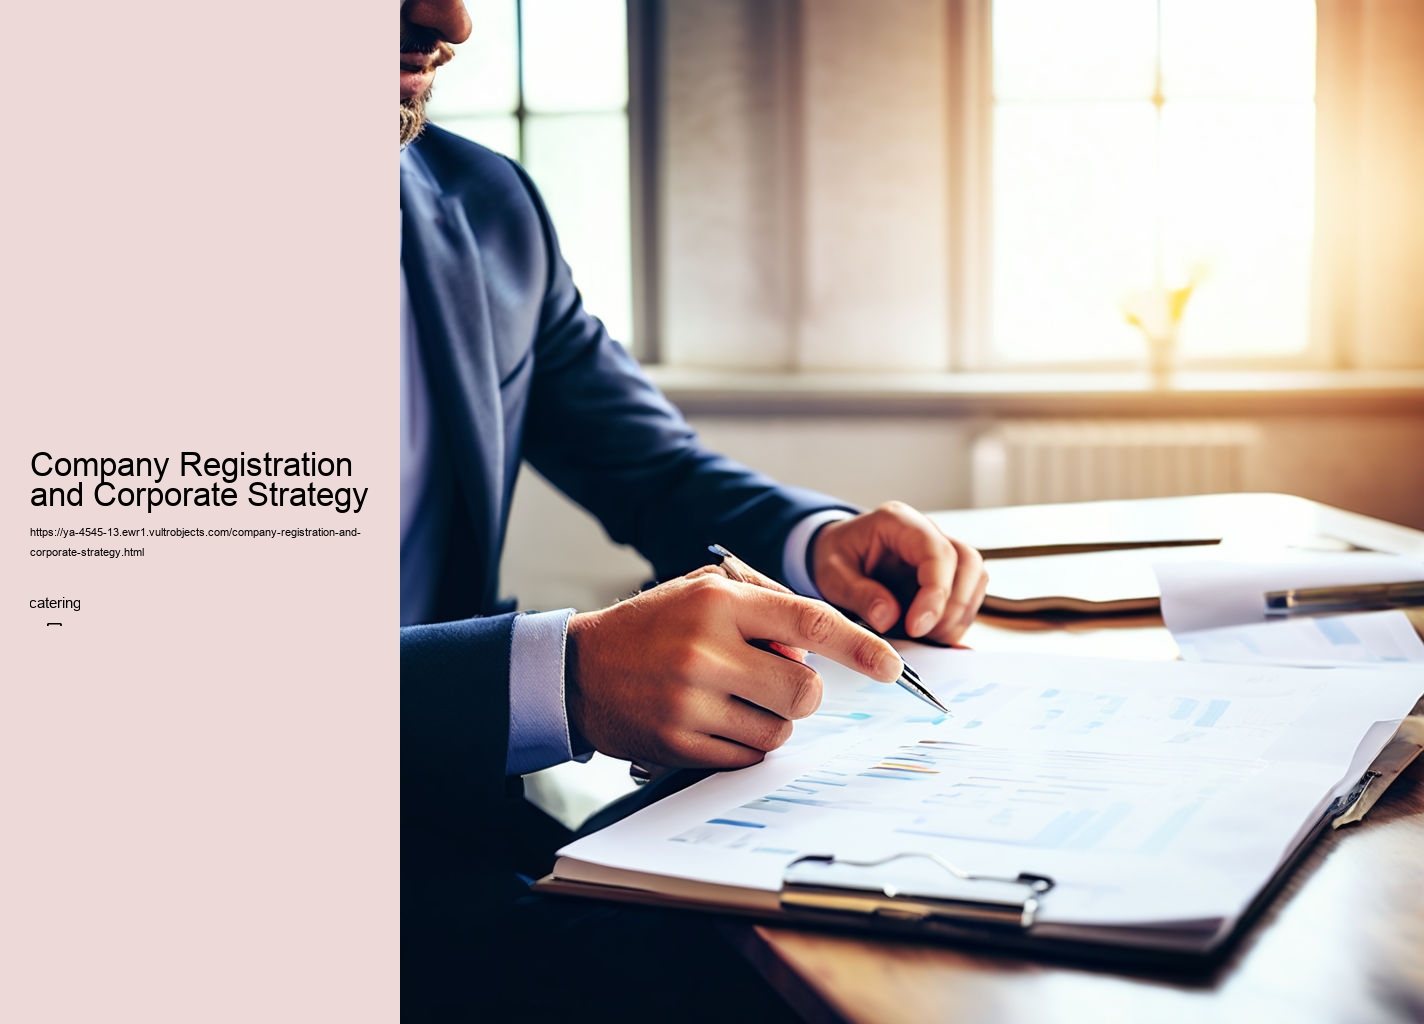 Company Registration and Corporate Strategy